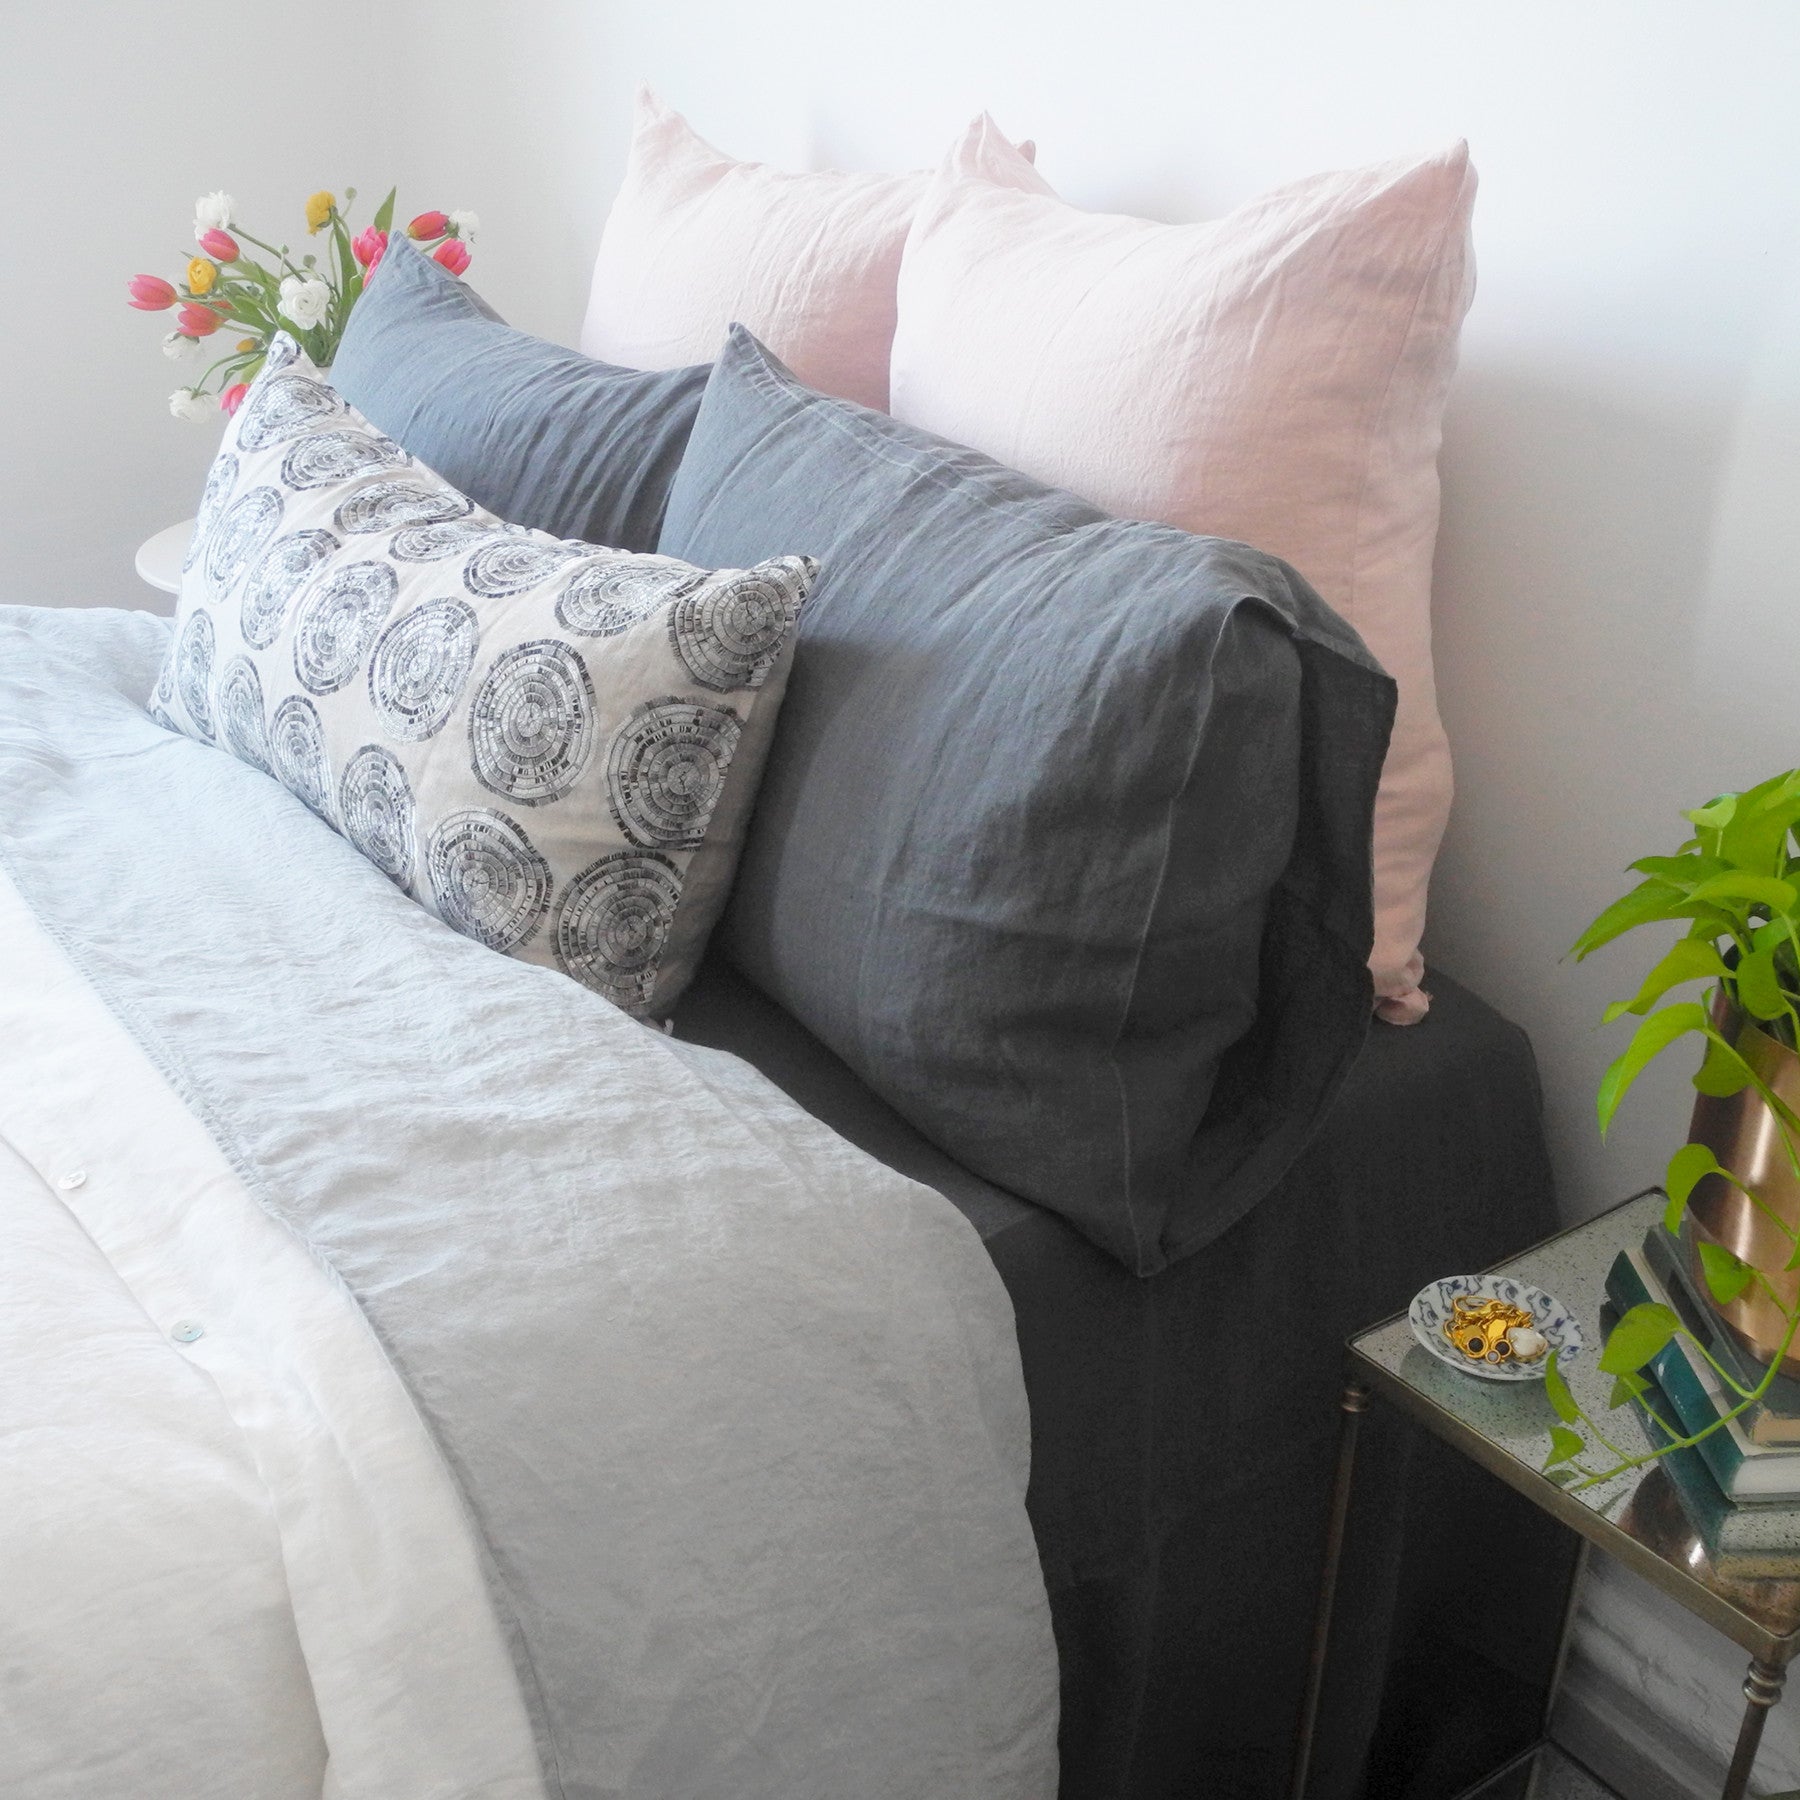 Linge Particulier Storm Grey Standard Linen Pillowcase Sham with nude euro shams and Coral & Tusk pillow for a colorful linen bedding look in charcoal grey - Collyer's Mansion